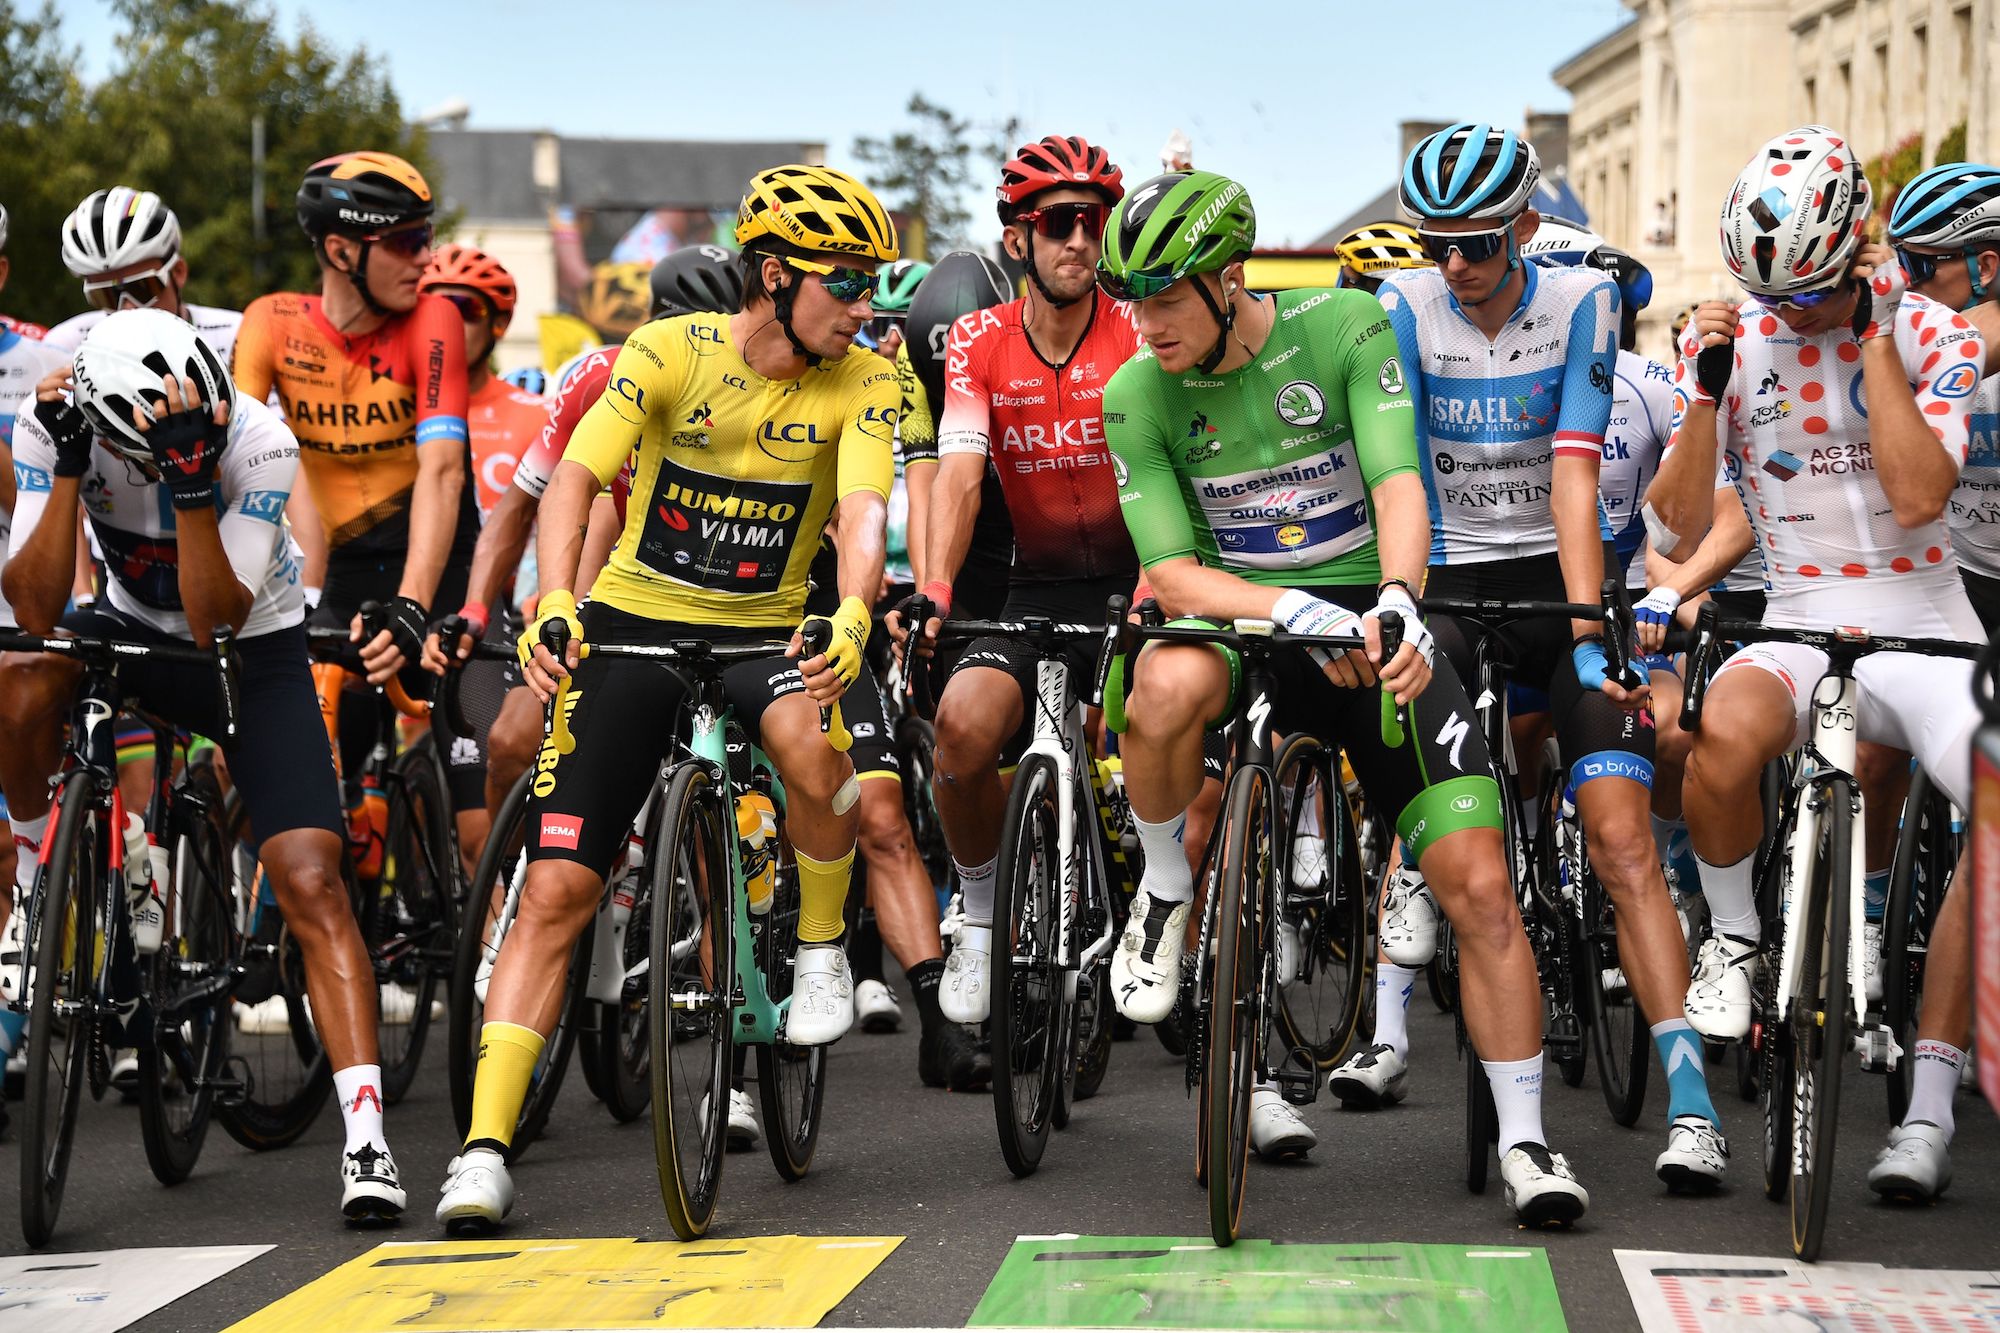 Rotterdam and The Hague look to host the Tour de France Grand Départ in